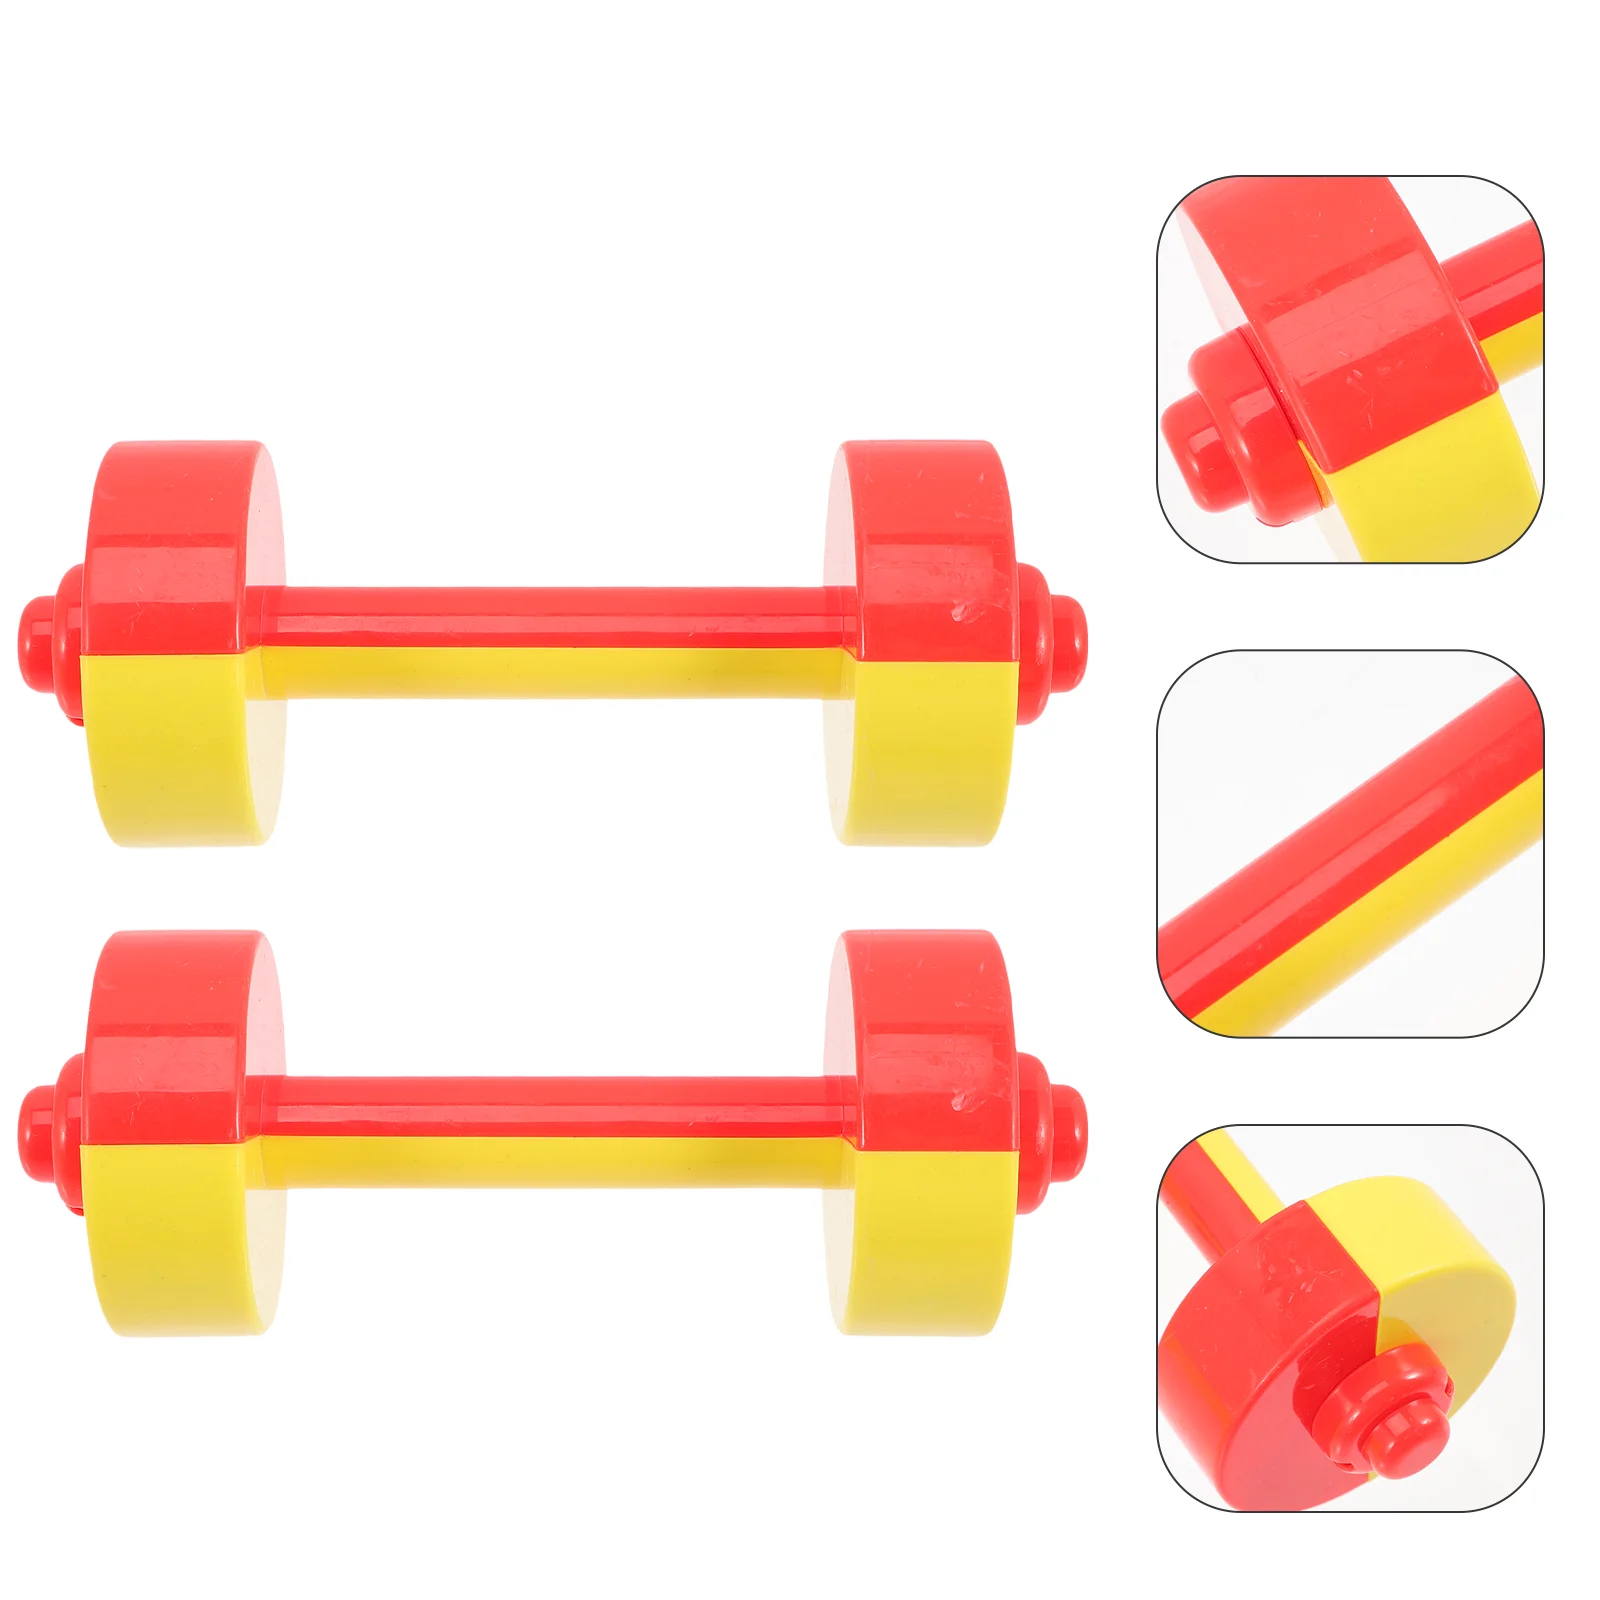 

2 Pcs Children's Dumbbell Exercising Weights Interactive Kids Toddler Outdoor Toy Interesting Plastic Playsets Small School